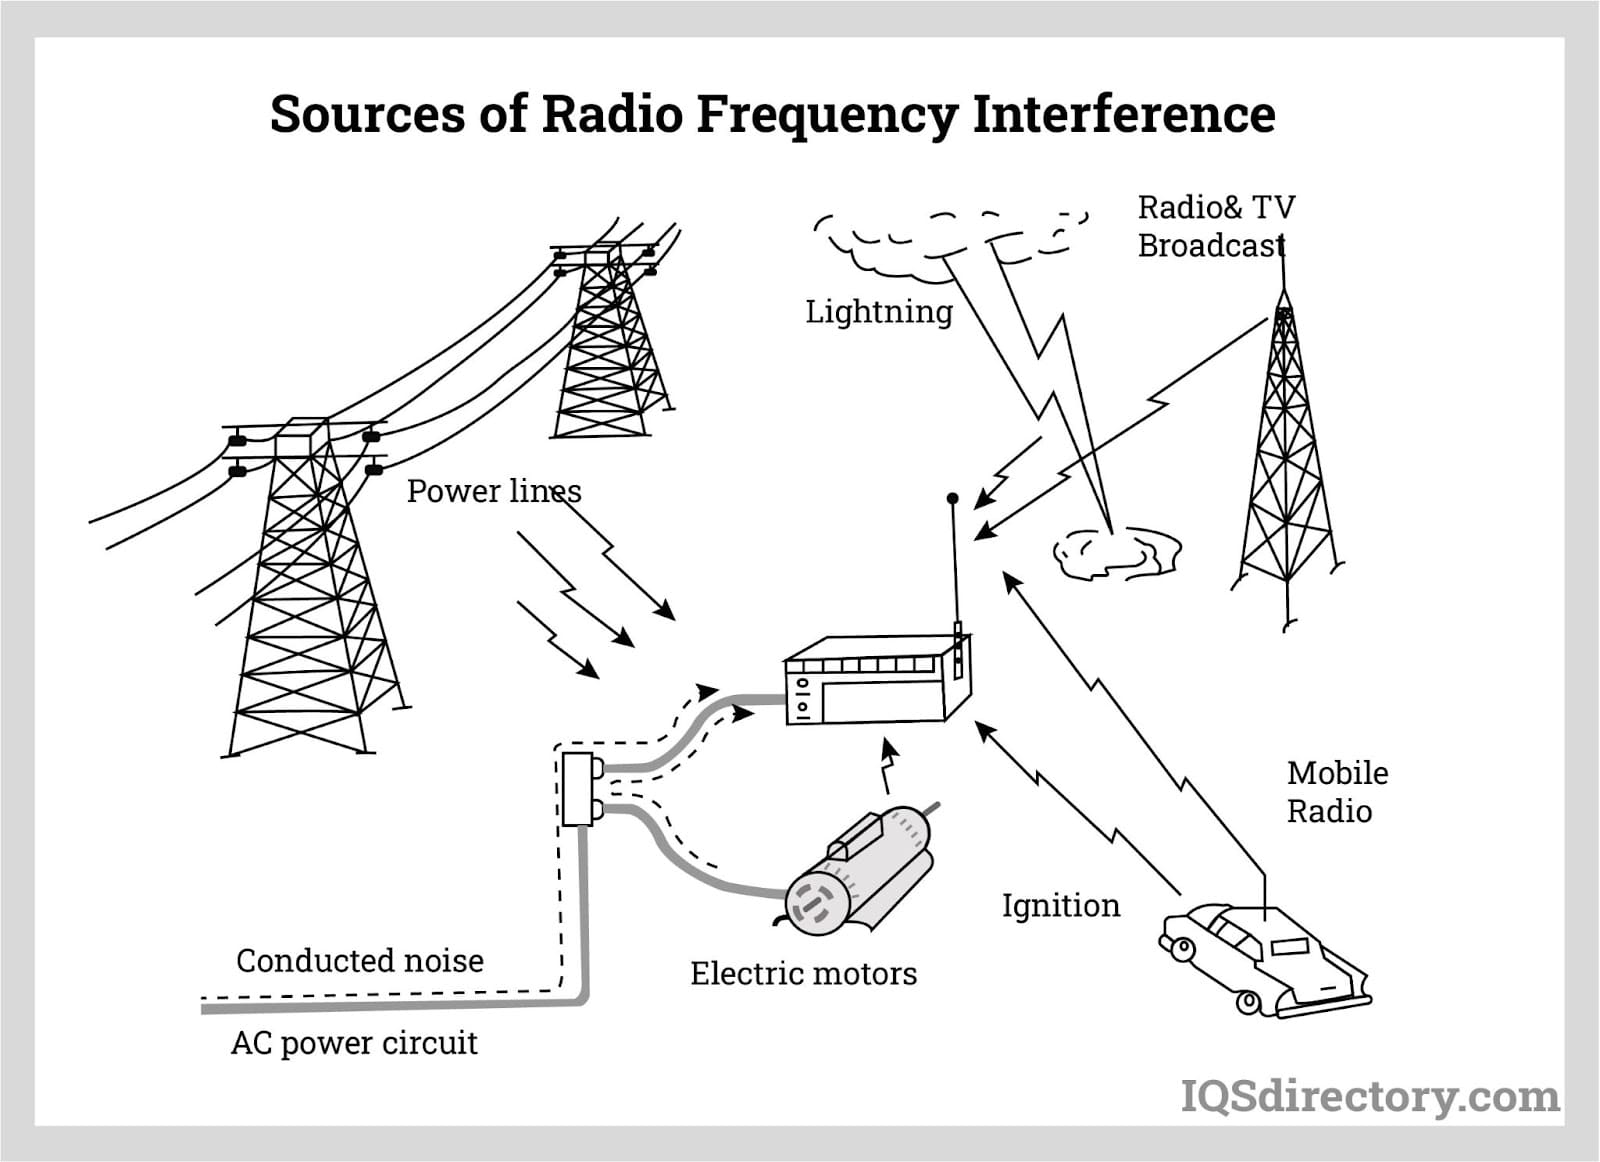 Sources of Radio Frequency Interference